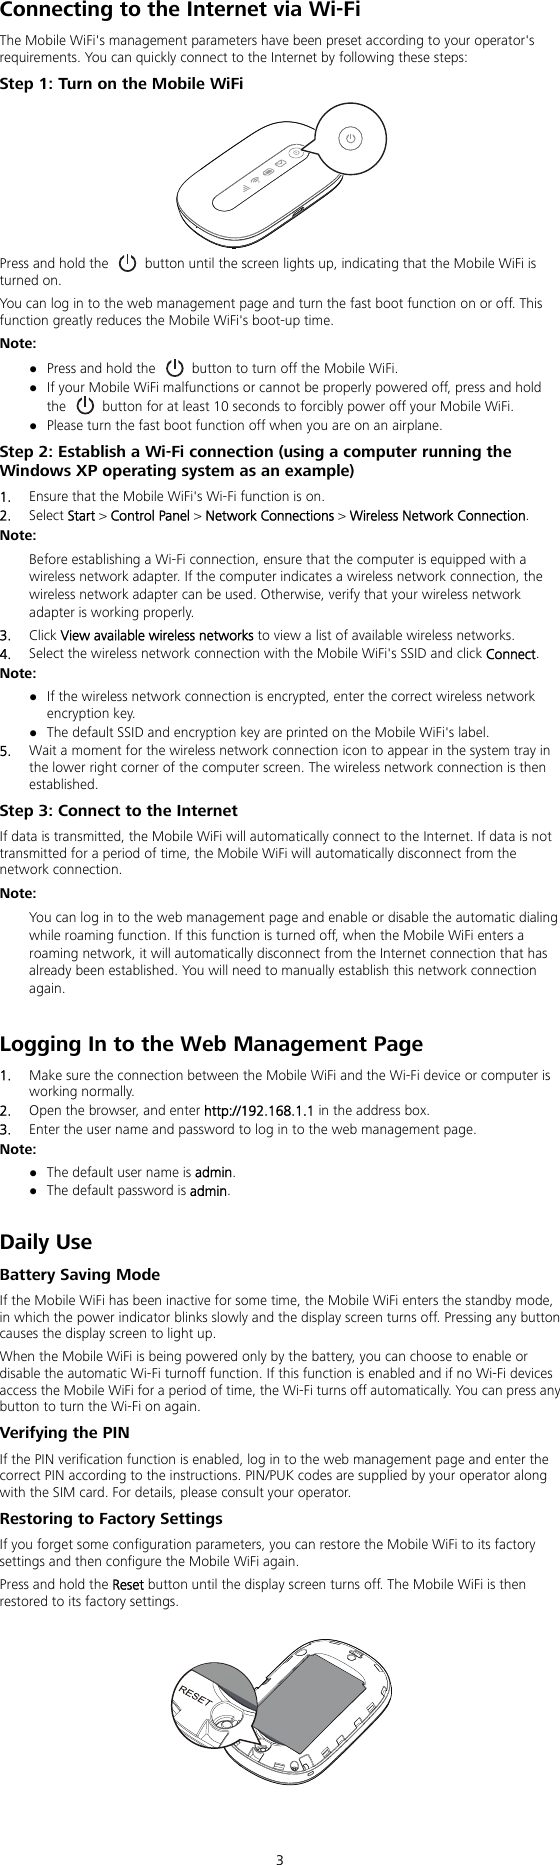  3 Connecting to the Internet via Wi-Fi The Mobile WiFi&apos;s management parameters have been preset according to your operator&apos;s requirements. You can quickly connect to the Internet by following these steps: Step 1: Turn on the Mobile WiFi  Press and hold the    button until the screen lights up, indicating that the Mobile WiFi is turned on. You can log in to the web management page and turn the fast boot function on or off. This function greatly reduces the Mobile WiFi&apos;s boot-up time. Note:  Press and hold the    button to turn off the Mobile WiFi.  If your Mobile WiFi malfunctions or cannot be properly powered off, press and hold the    button for at least 10 seconds to forcibly power off your Mobile WiFi.  Please turn the fast boot function off when you are on an airplane. Step 2: Establish a Wi-Fi connection (using a computer running the Windows XP operating system as an example) 1.  Ensure that the Mobile WiFi&apos;s Wi-Fi function is on. 2.  Select Start &gt; Control Panel &gt; Network Connections &gt; Wireless Network Connection. Note:  Before establishing a Wi-Fi connection, ensure that the computer is equipped with a wireless network adapter. If the computer indicates a wireless network connection, the wireless network adapter can be used. Otherwise, verify that your wireless network adapter is working properly. 3.  Click View available wireless networks to view a list of available wireless networks. 4.  Select the wireless network connection with the Mobile WiFi&apos;s SSID and click Connect. Note:  If the wireless network connection is encrypted, enter the correct wireless network encryption key.  The default SSID and encryption key are printed on the Mobile WiFi&apos;s label. 5.  Wait a moment for the wireless network connection icon to appear in the system tray in the lower right corner of the computer screen. The wireless network connection is then established. Step 3: Connect to the Internet If data is transmitted, the Mobile WiFi will automatically connect to the Internet. If data is not transmitted for a period of time, the Mobile WiFi will automatically disconnect from the network connection. Note:  You can log in to the web management page and enable or disable the automatic dialing while roaming function. If this function is turned off, when the Mobile WiFi enters a roaming network, it will automatically disconnect from the Internet connection that has already been established. You will need to manually establish this network connection again.  Logging In to the Web Management Page 1.  Make sure the connection between the Mobile WiFi and the Wi-Fi device or computer is working normally. 2.  Open the browser, and enter http://192.168.1.1 in the address box. 3.  Enter the user name and password to log in to the web management page. Note:  The default user name is admin.  The default password is admin.  Daily Use Battery Saving Mode If the Mobile WiFi has been inactive for some time, the Mobile WiFi enters the standby mode, in which the power indicator blinks slowly and the display screen turns off. Pressing any button causes the display screen to light up. When the Mobile WiFi is being powered only by the battery, you can choose to enable or disable the automatic Wi-Fi turnoff function. If this function is enabled and if no Wi-Fi devices access the Mobile WiFi for a period of time, the Wi-Fi turns off automatically. You can press any button to turn the Wi-Fi on again. Verifying the PIN If the PIN verification function is enabled, log in to the web management page and enter the correct PIN according to the instructions. PIN/PUK codes are supplied by your operator along with the SIM card. For details, please consult your operator. Restoring to Factory Settings If you forget some configuration parameters, you can restore the Mobile WiFi to its factory settings and then configure the Mobile WiFi again. Press and hold the Reset button until the display screen turns off. The Mobile WiFi is then restored to its factory settings.     